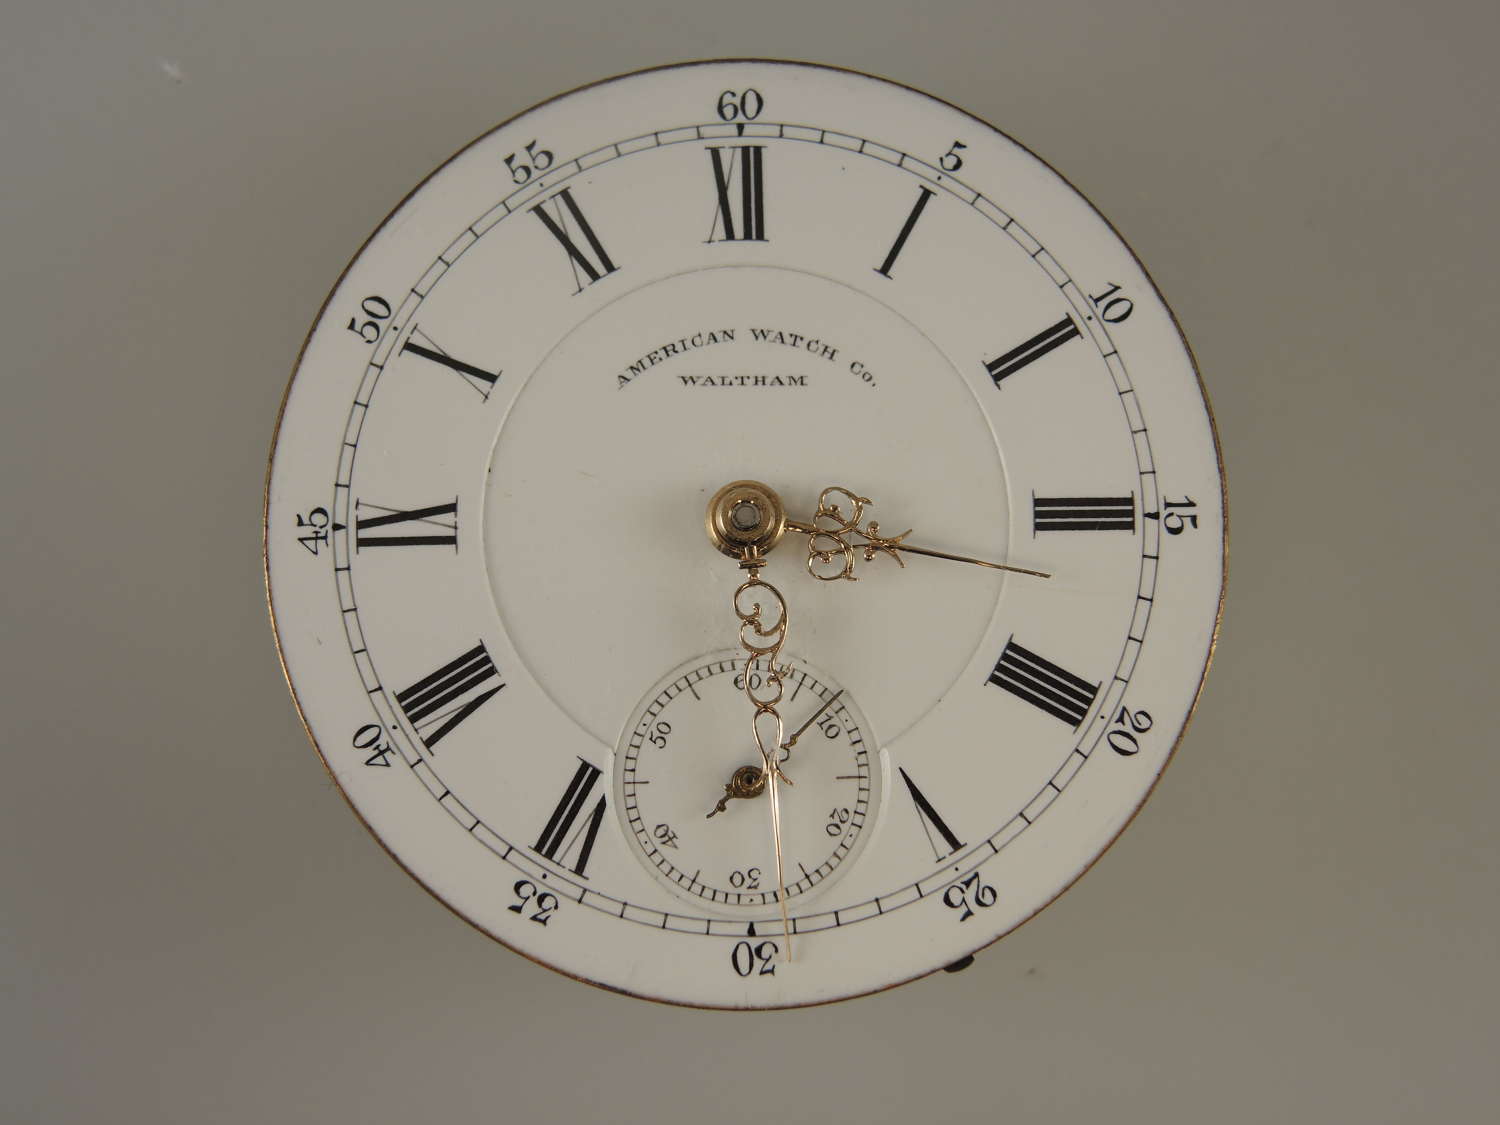 Fine example of a 18s 15J Waltham hunter pocket watch movement c1883